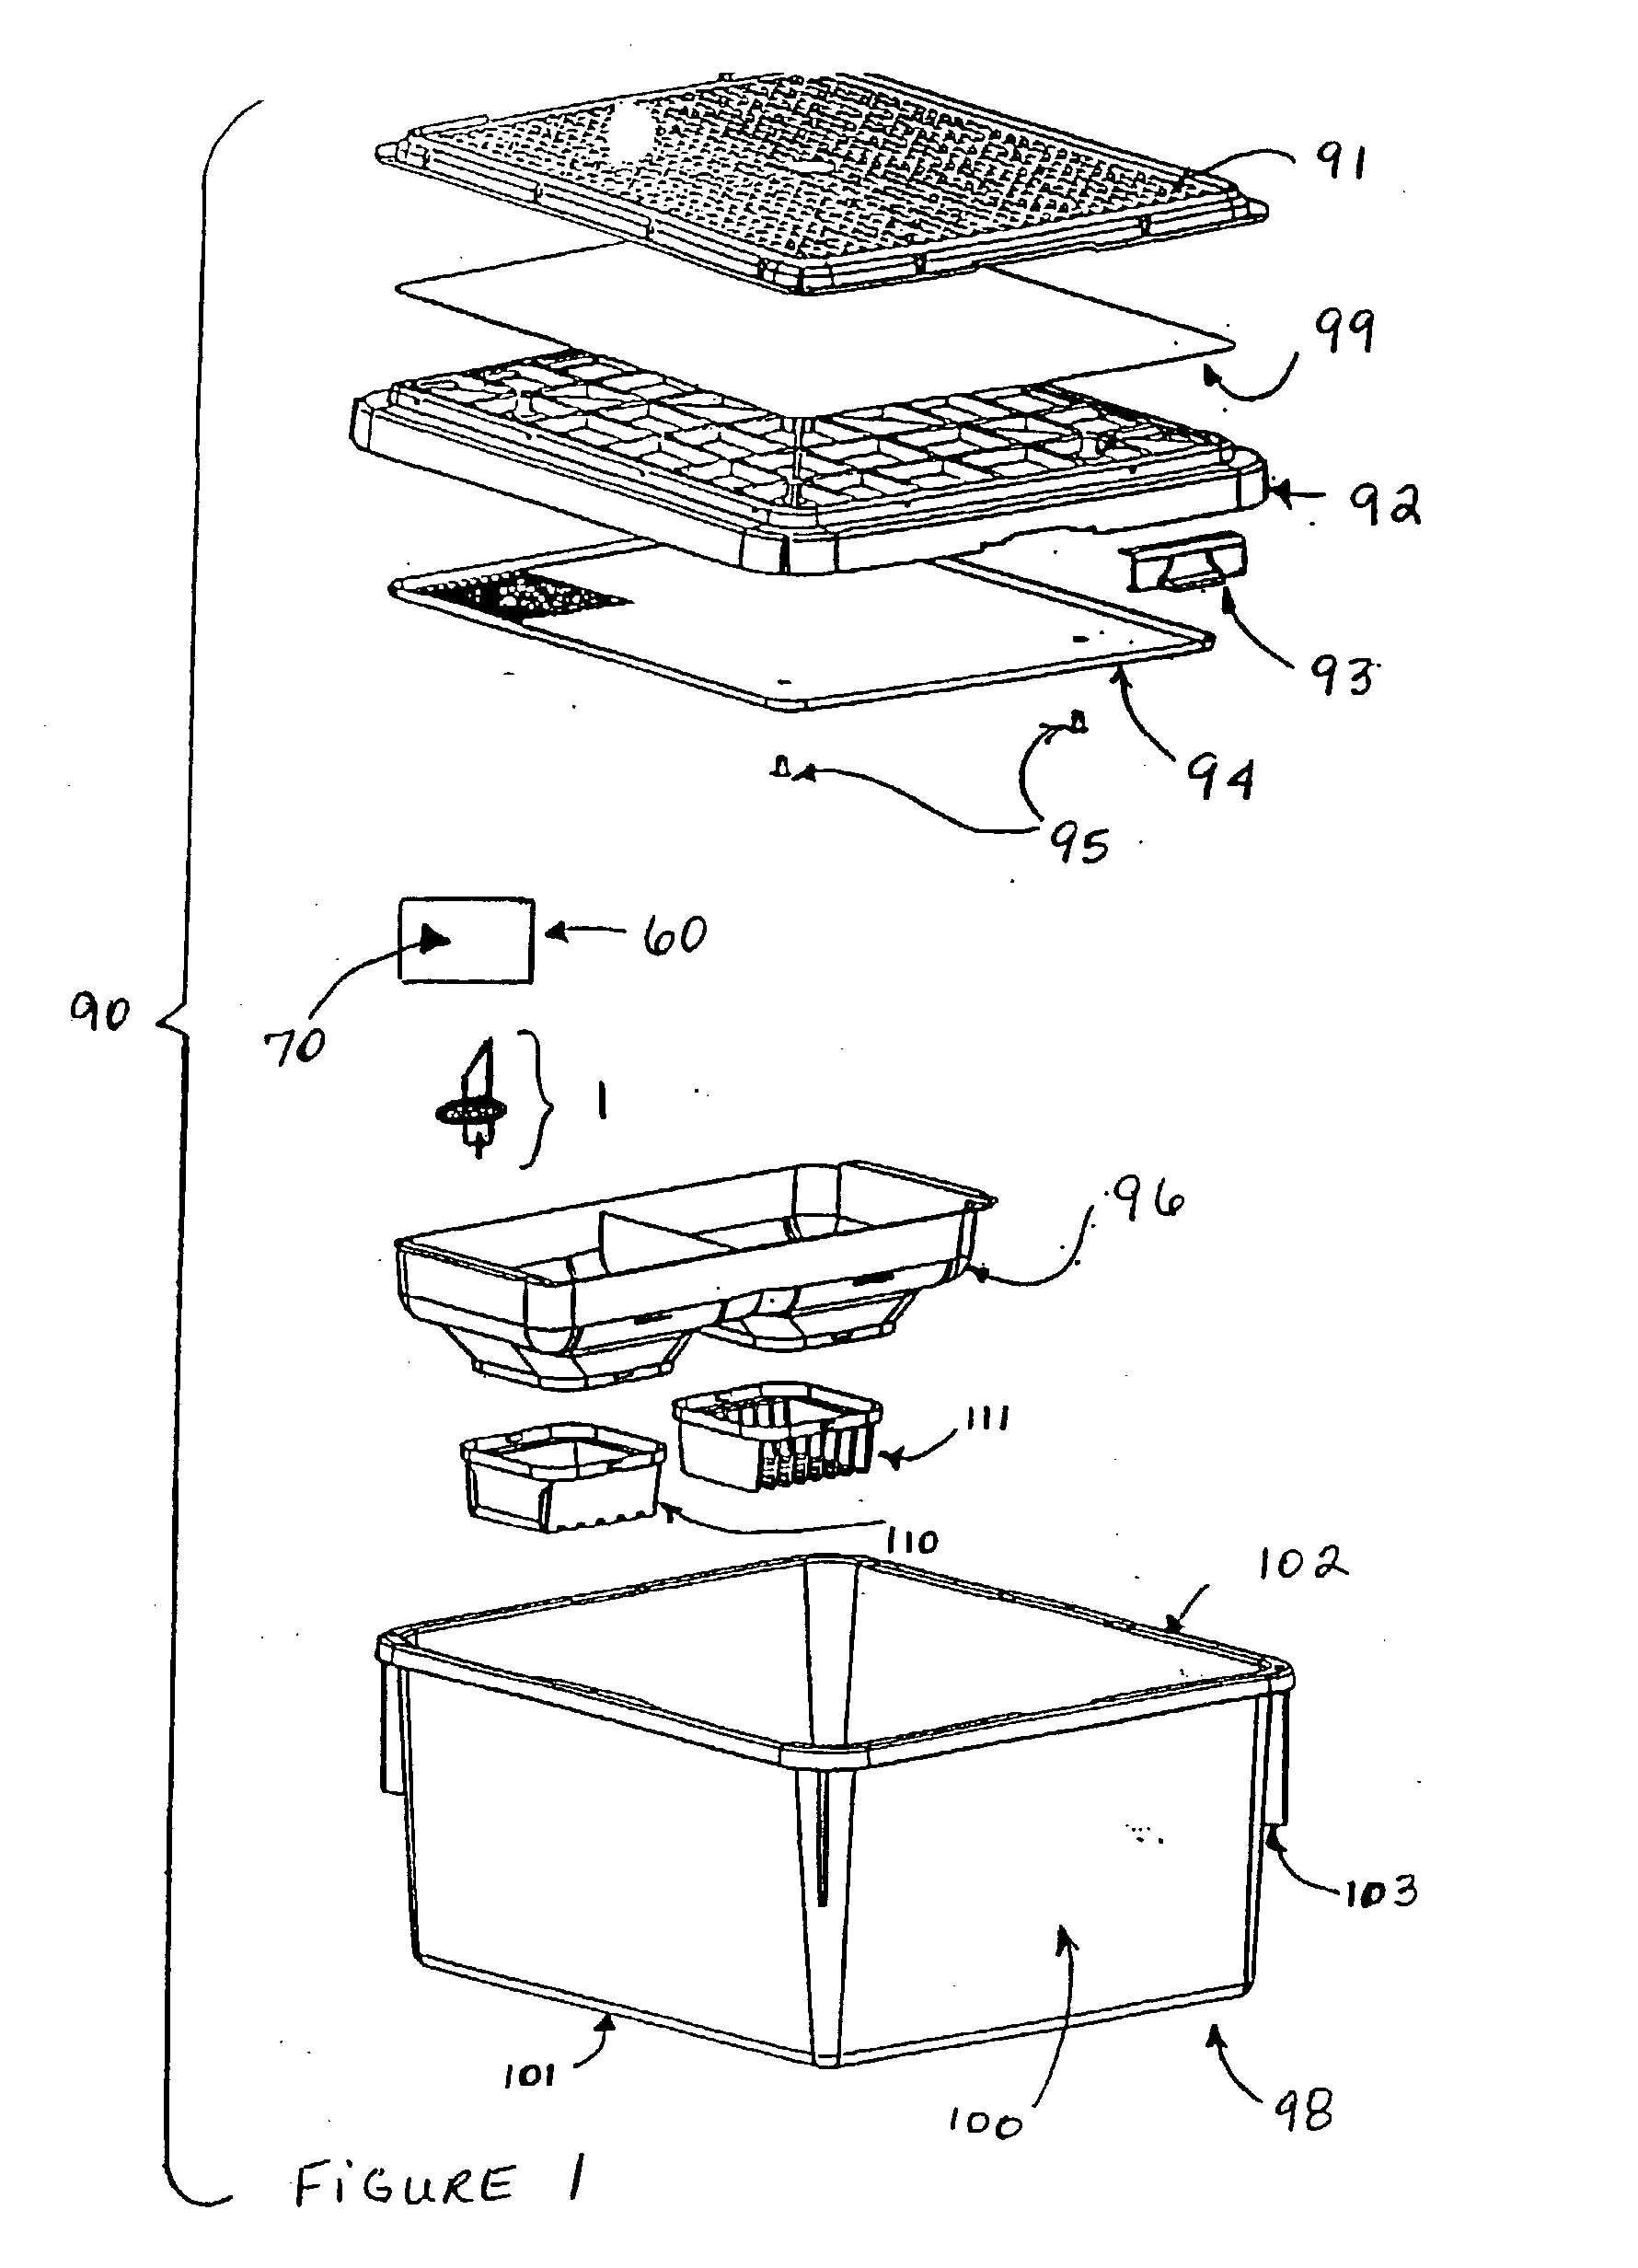 Fluid delivery system